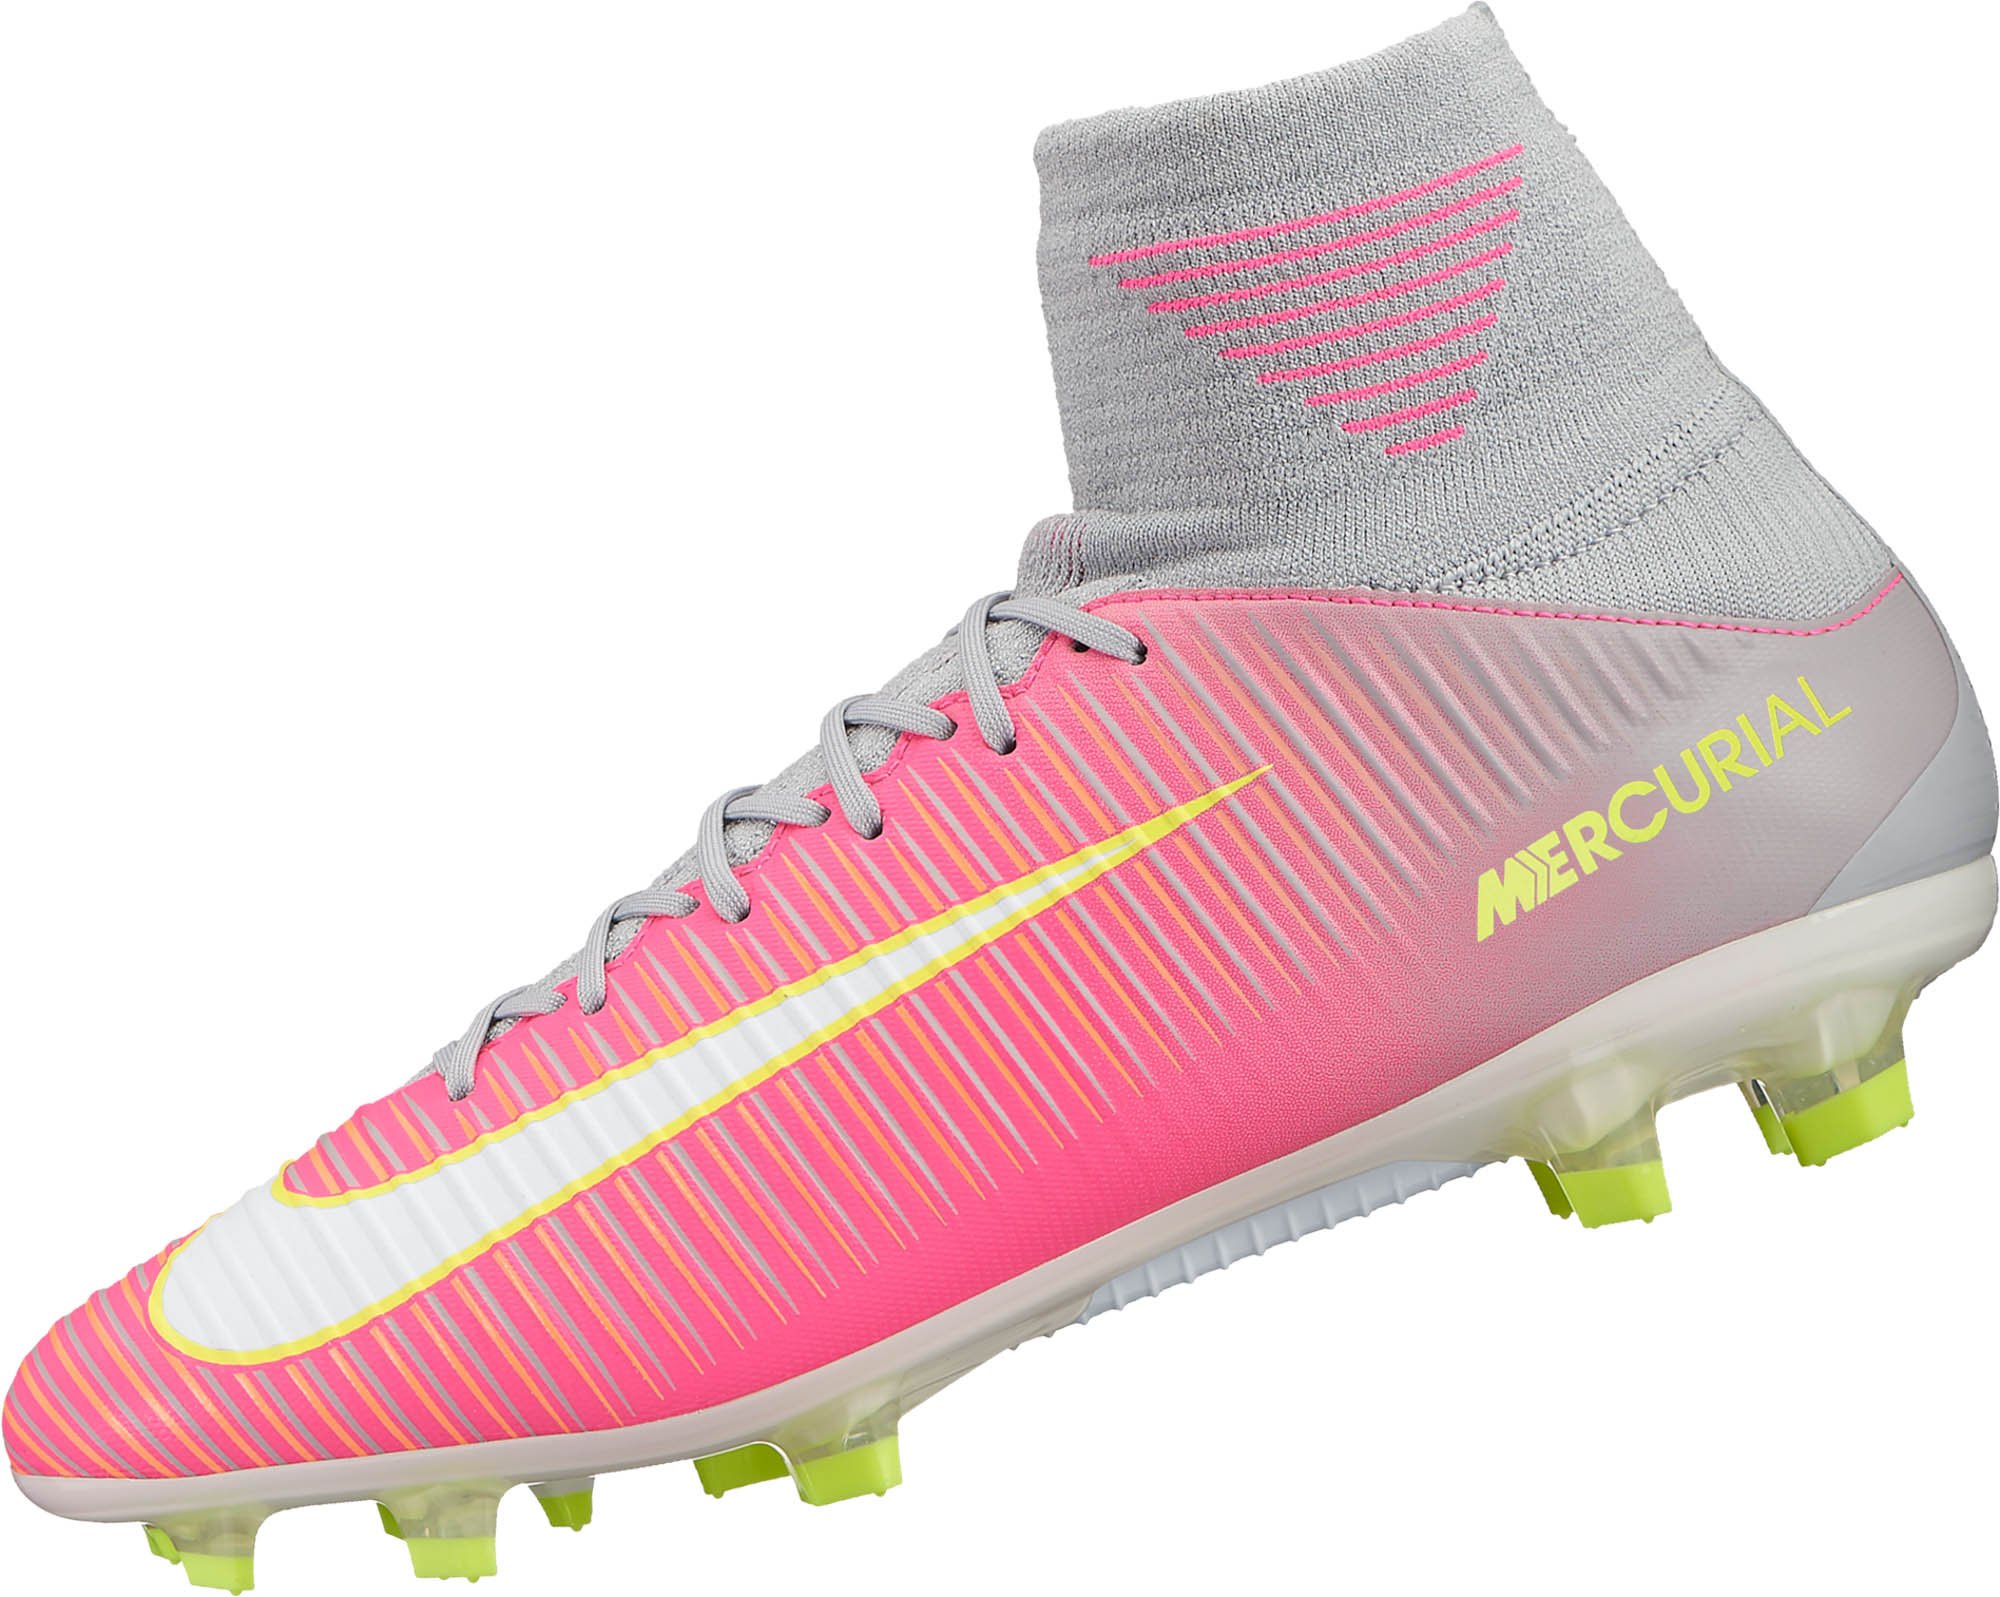 Nike Zoom Mercurial Superfly Pro FG Firm Ground Soccer Cleats Pink ...